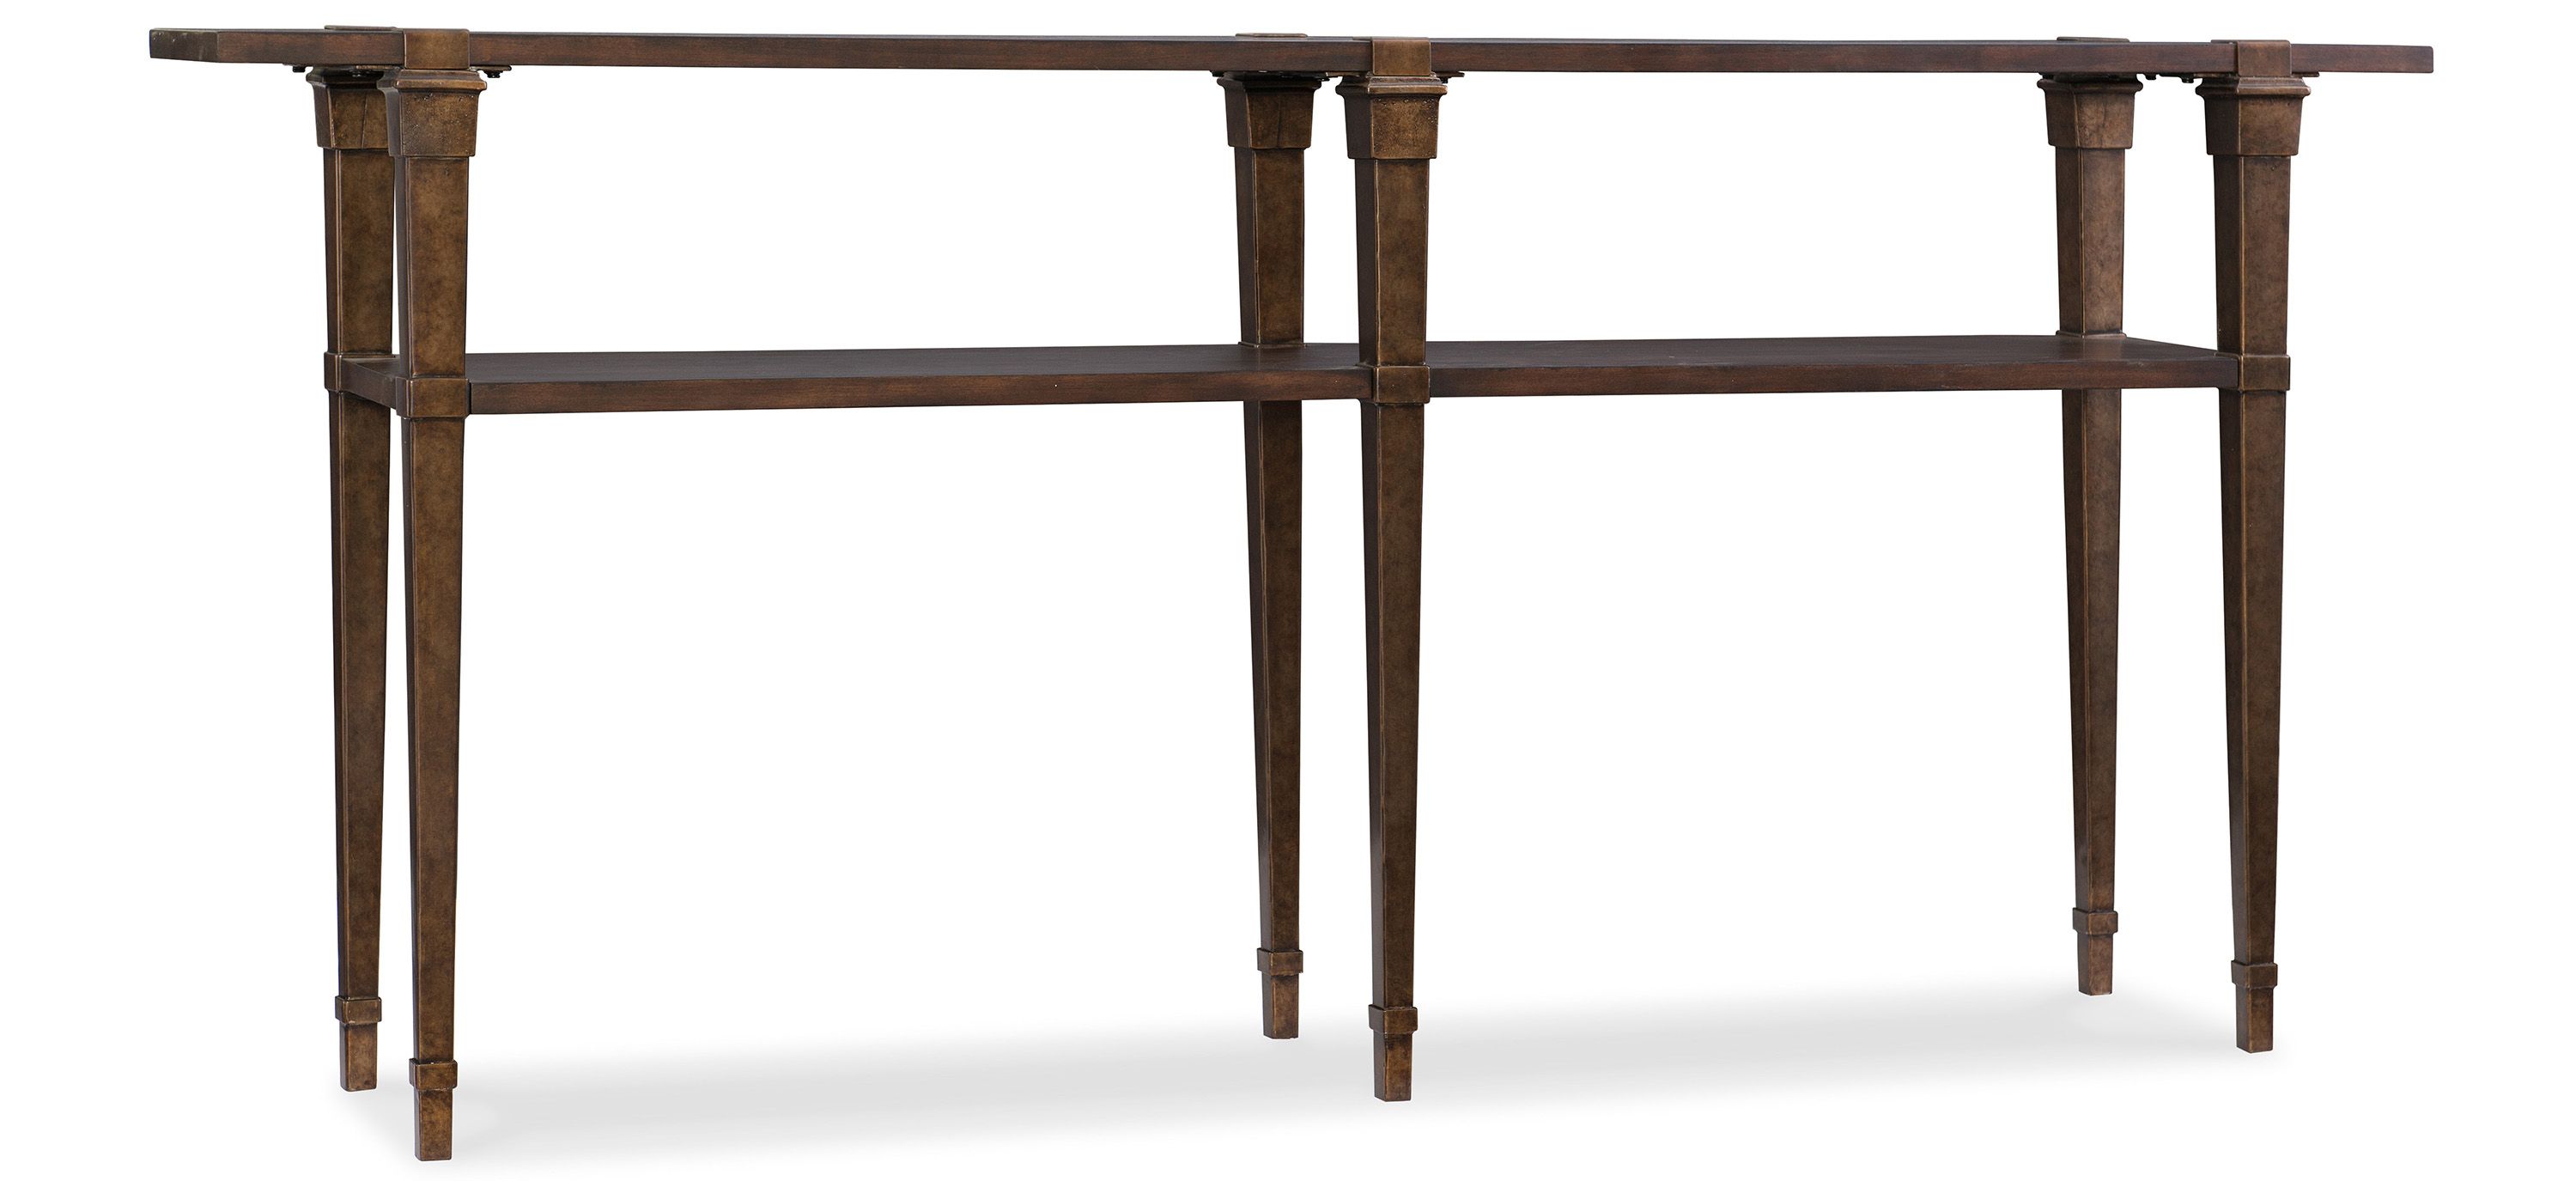 Serin Skinny Console Table